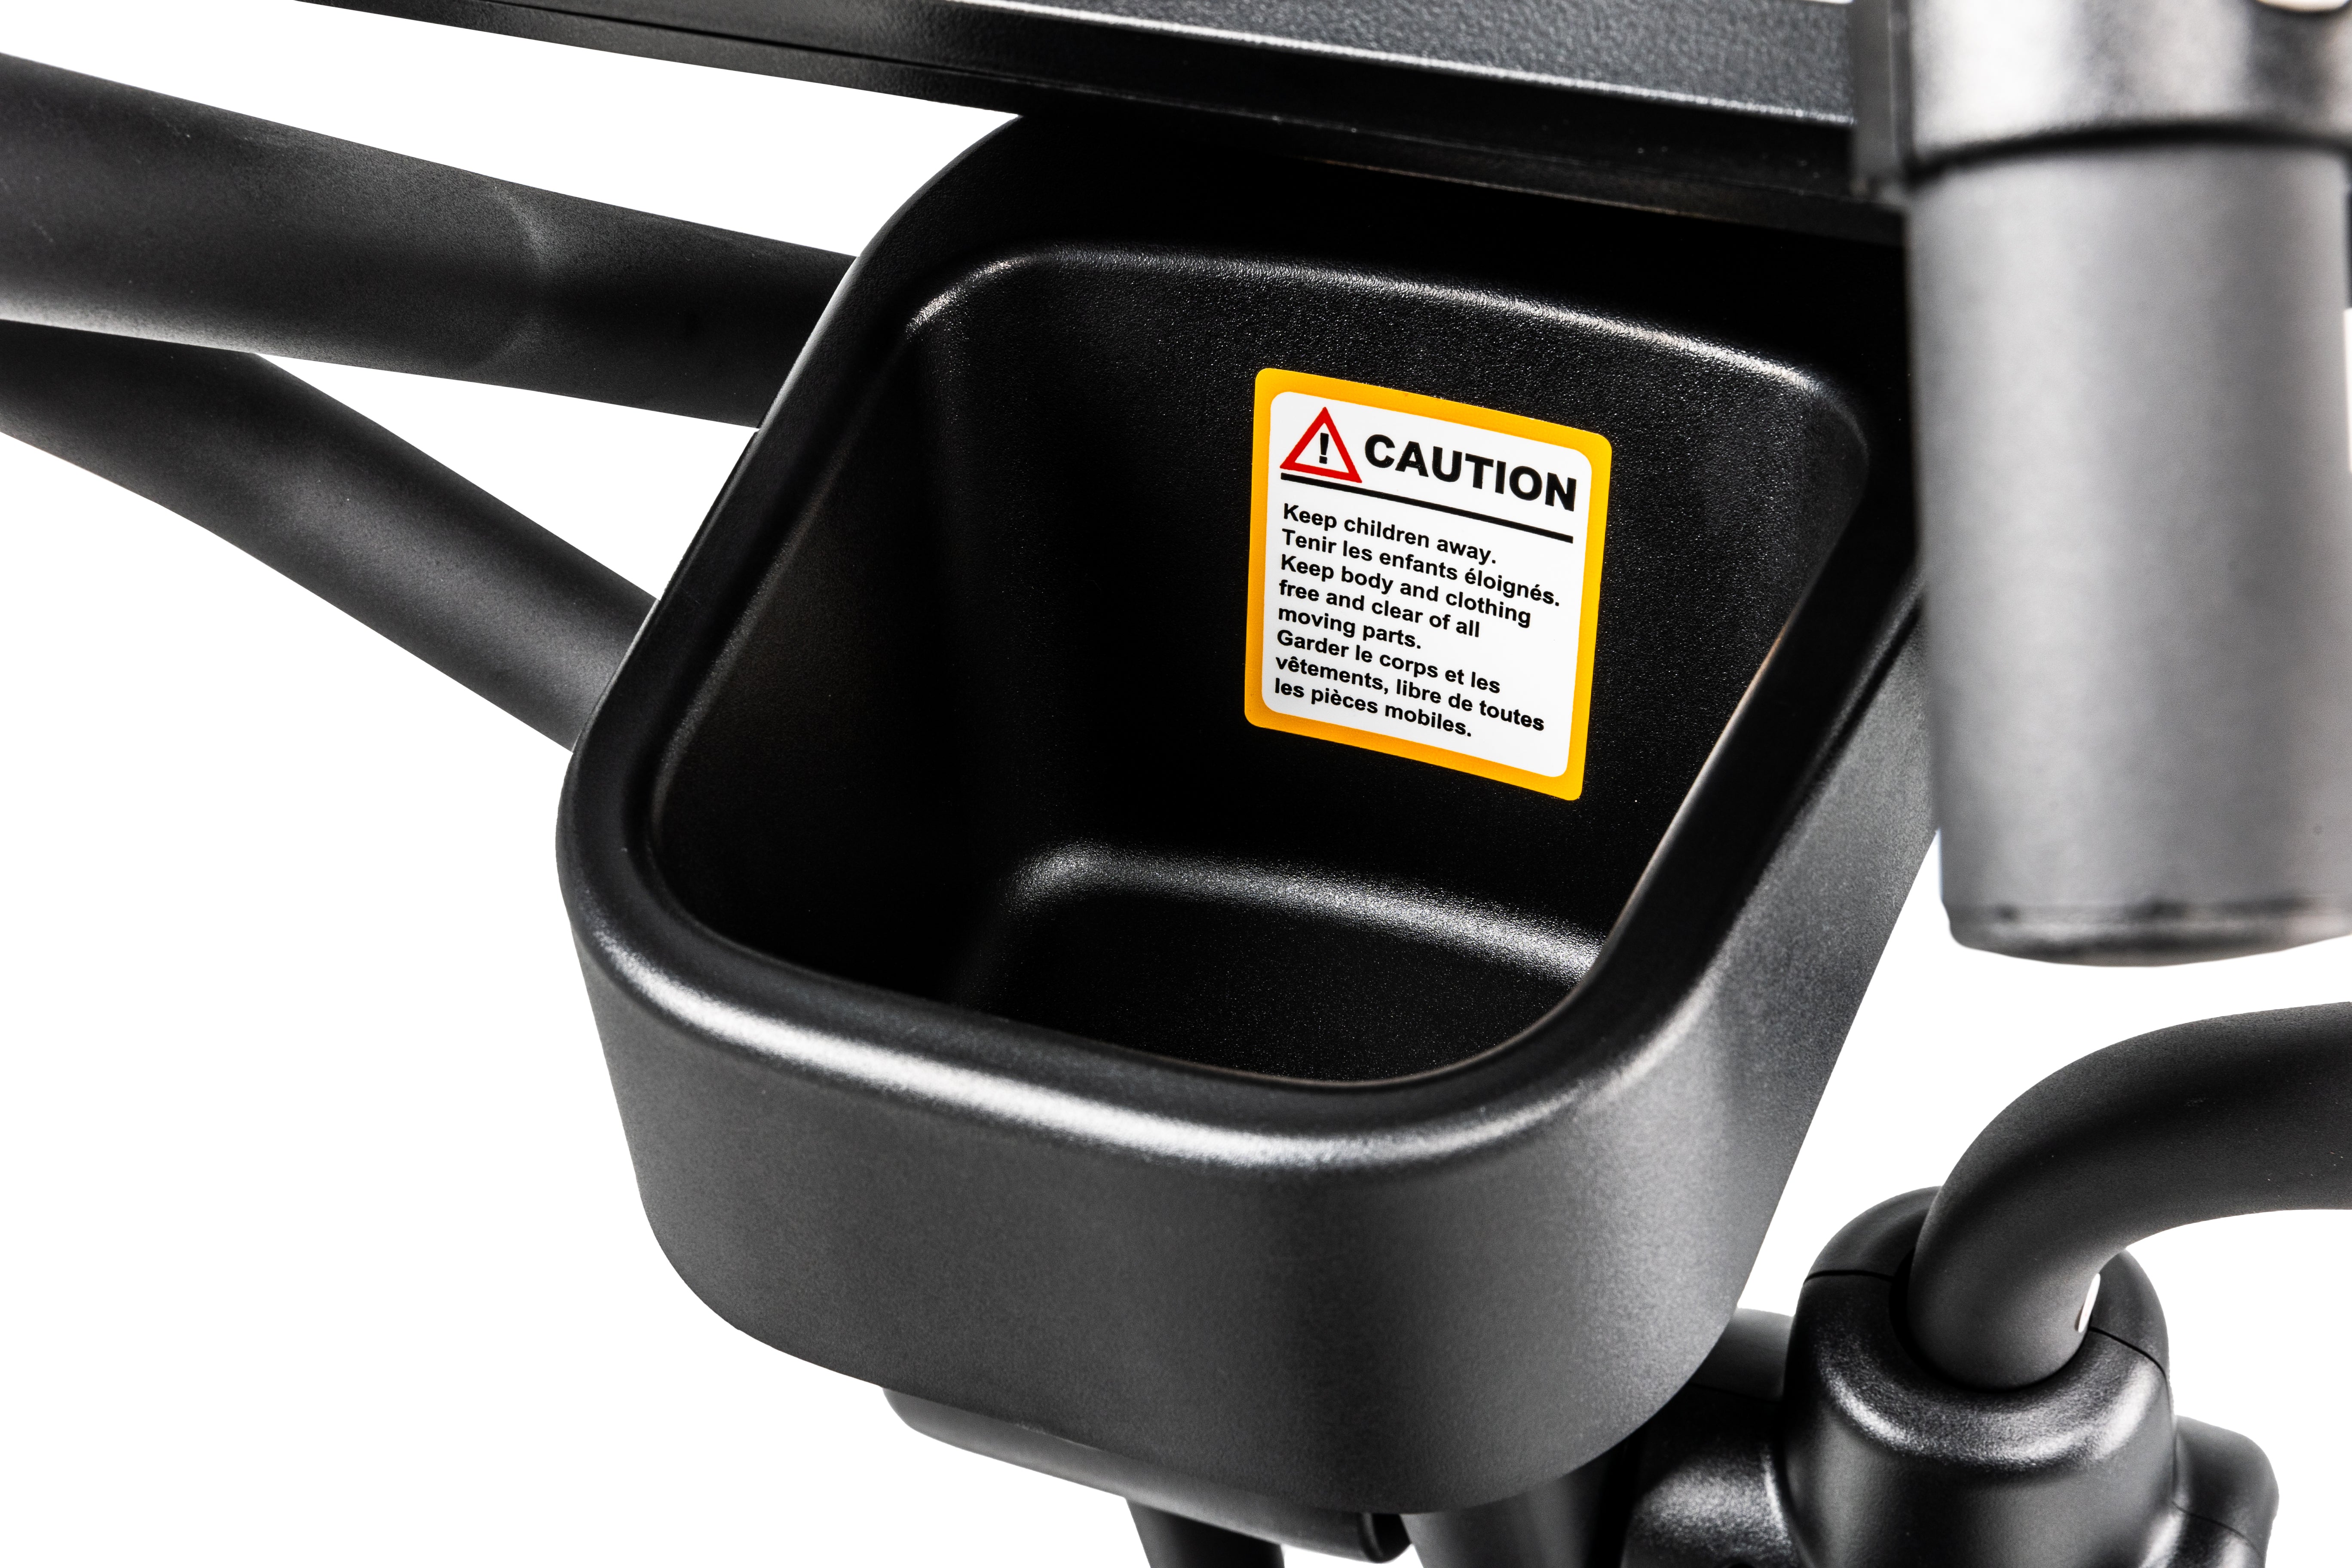 Close-up view of a storage compartment on the Sole E25 elliptical trainer, showing a black tray and surrounding structure, with a prominent yellow 'CAUTION' label warning users to keep children away and be mindful of moving parts.